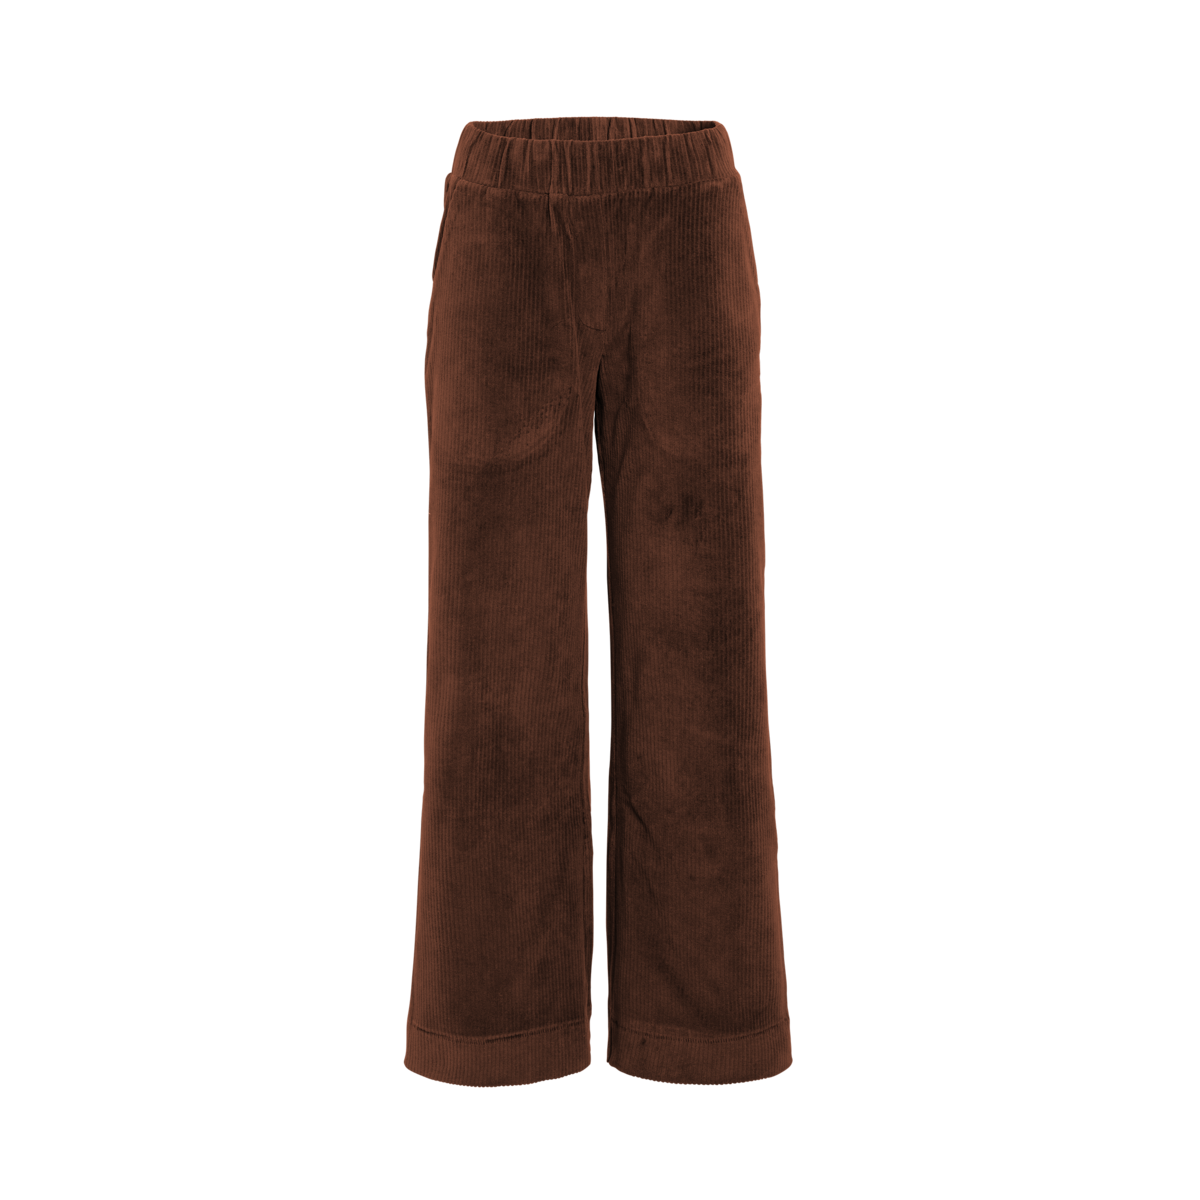 Brown Trousers, PARSELINA